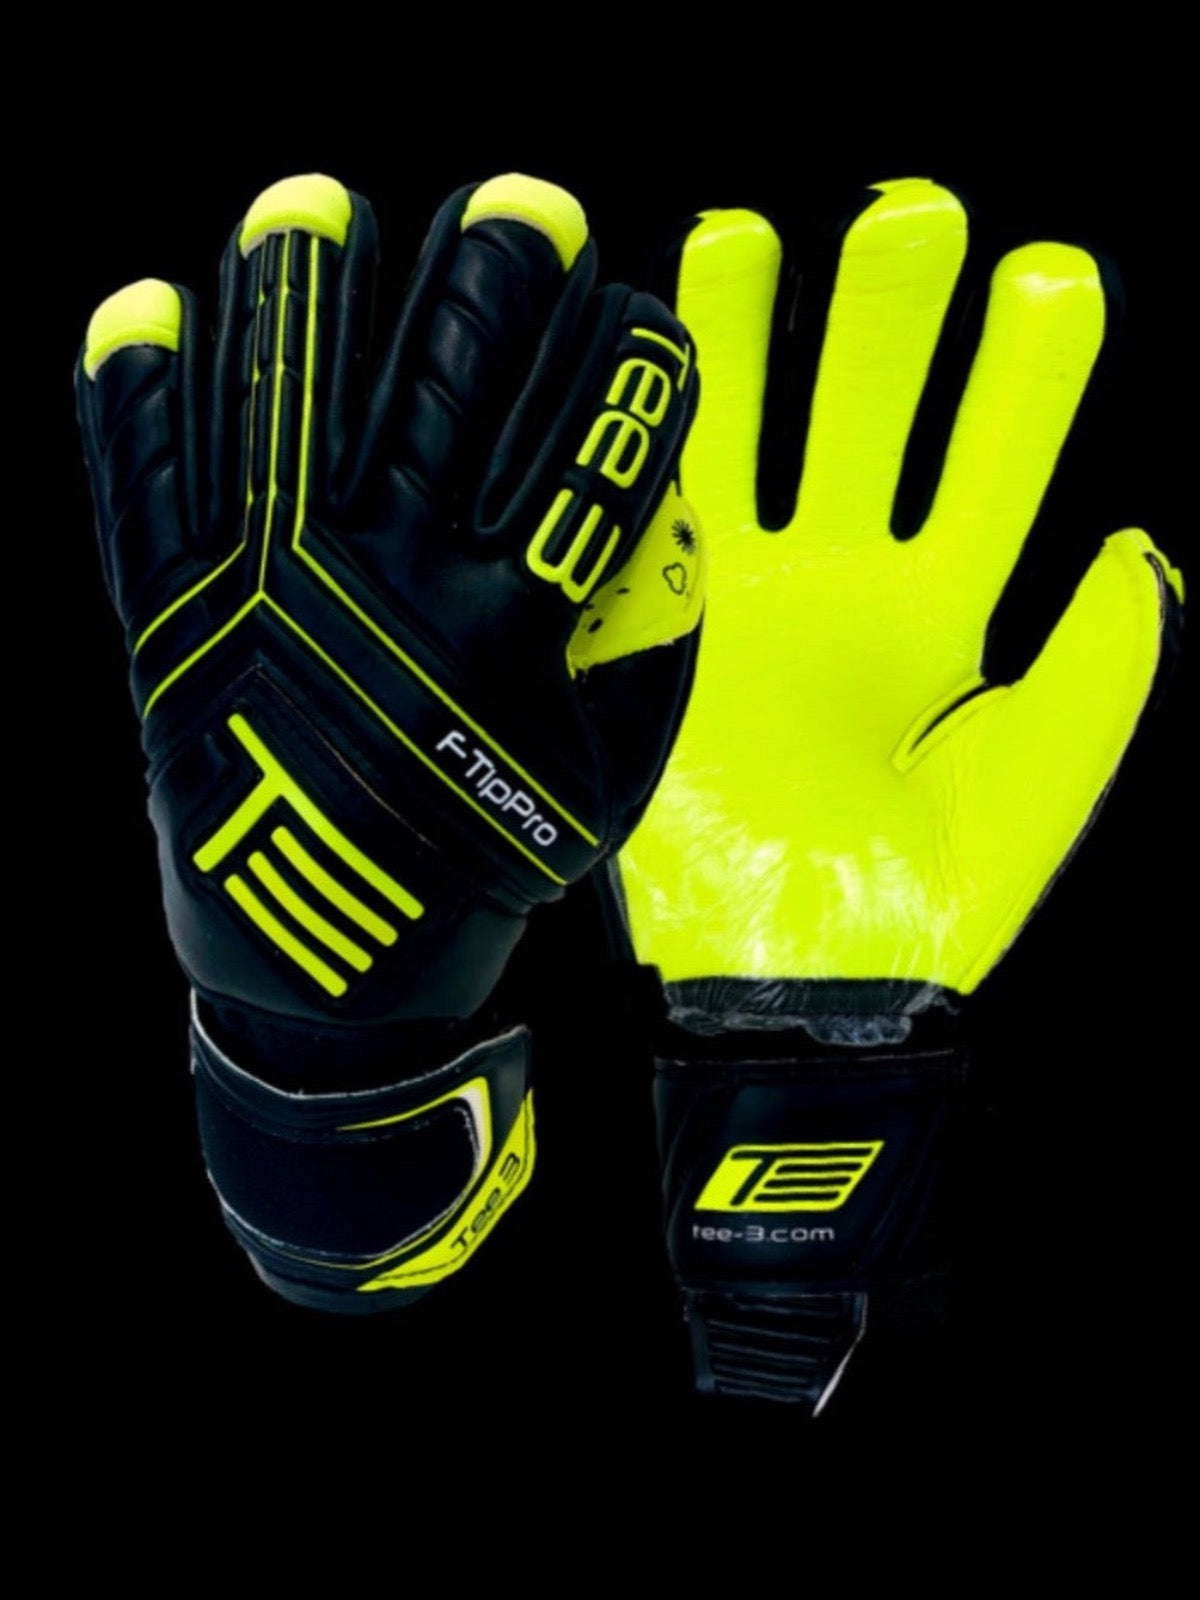 A goalkeeping glove with removable fingersaves worn by professional goalkeepers